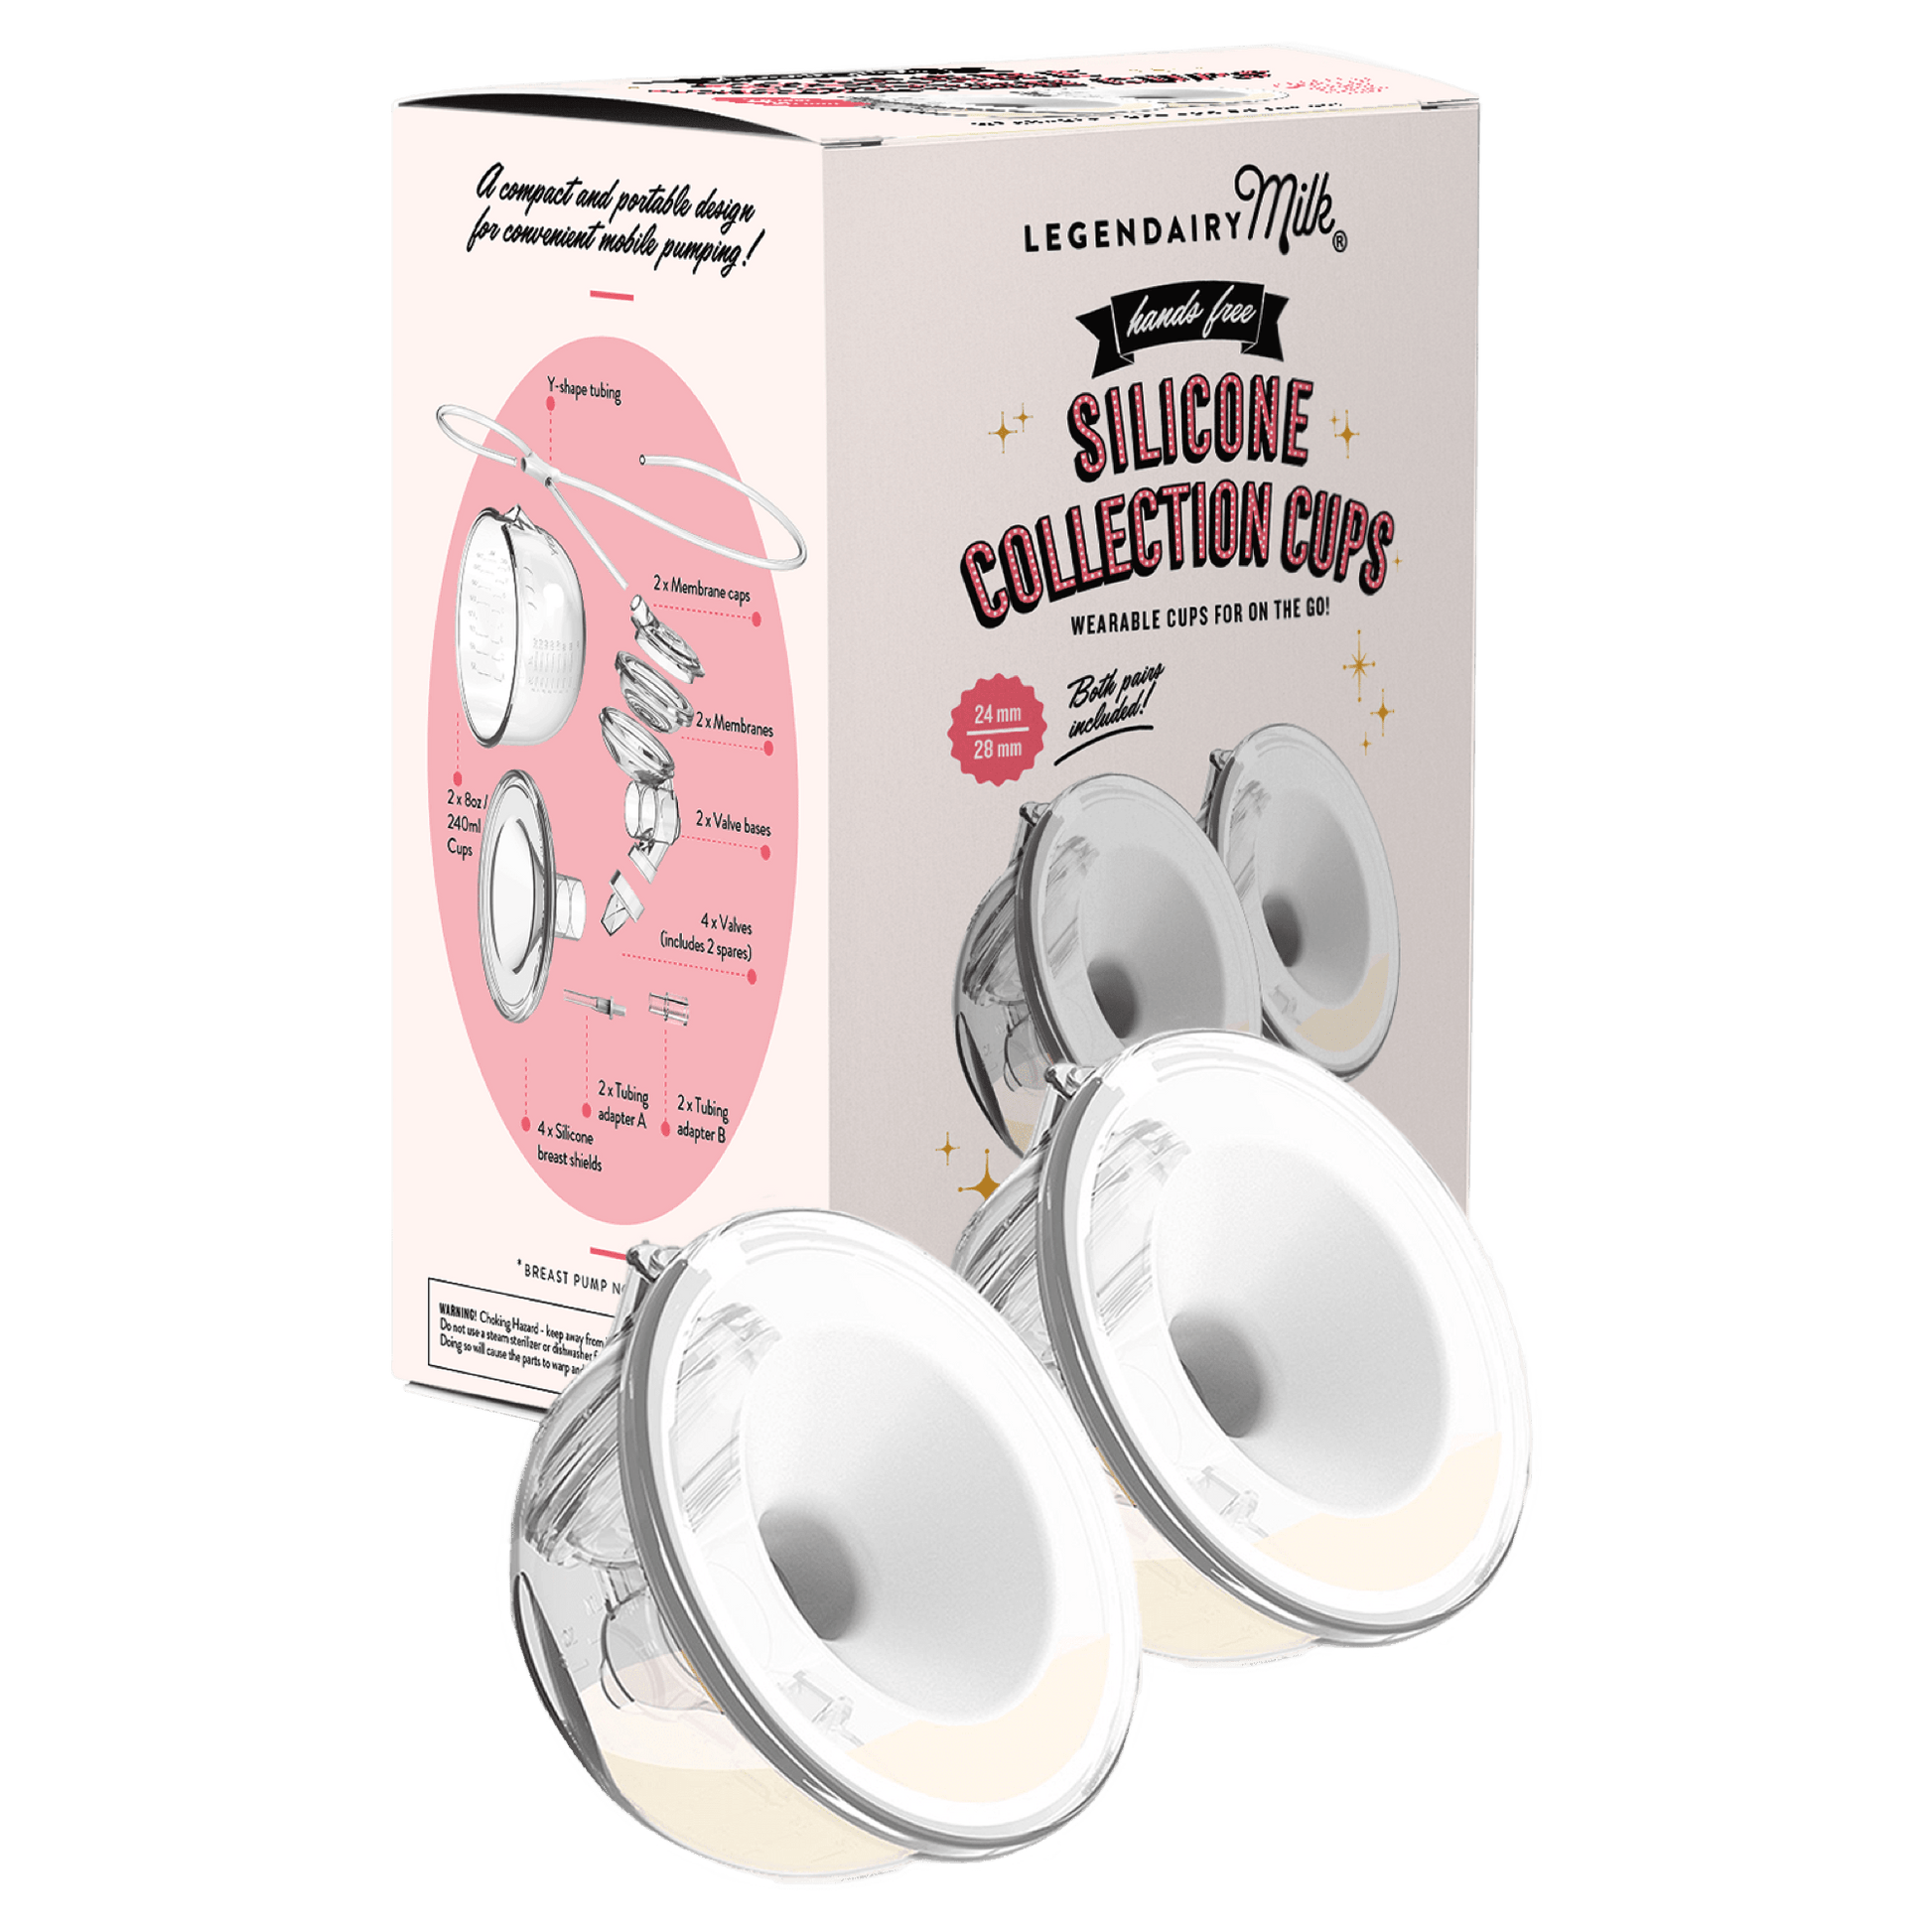 Silicone Collection Cups – Legendairy Milk Singapore by Hoomie Inc Pte Ltd